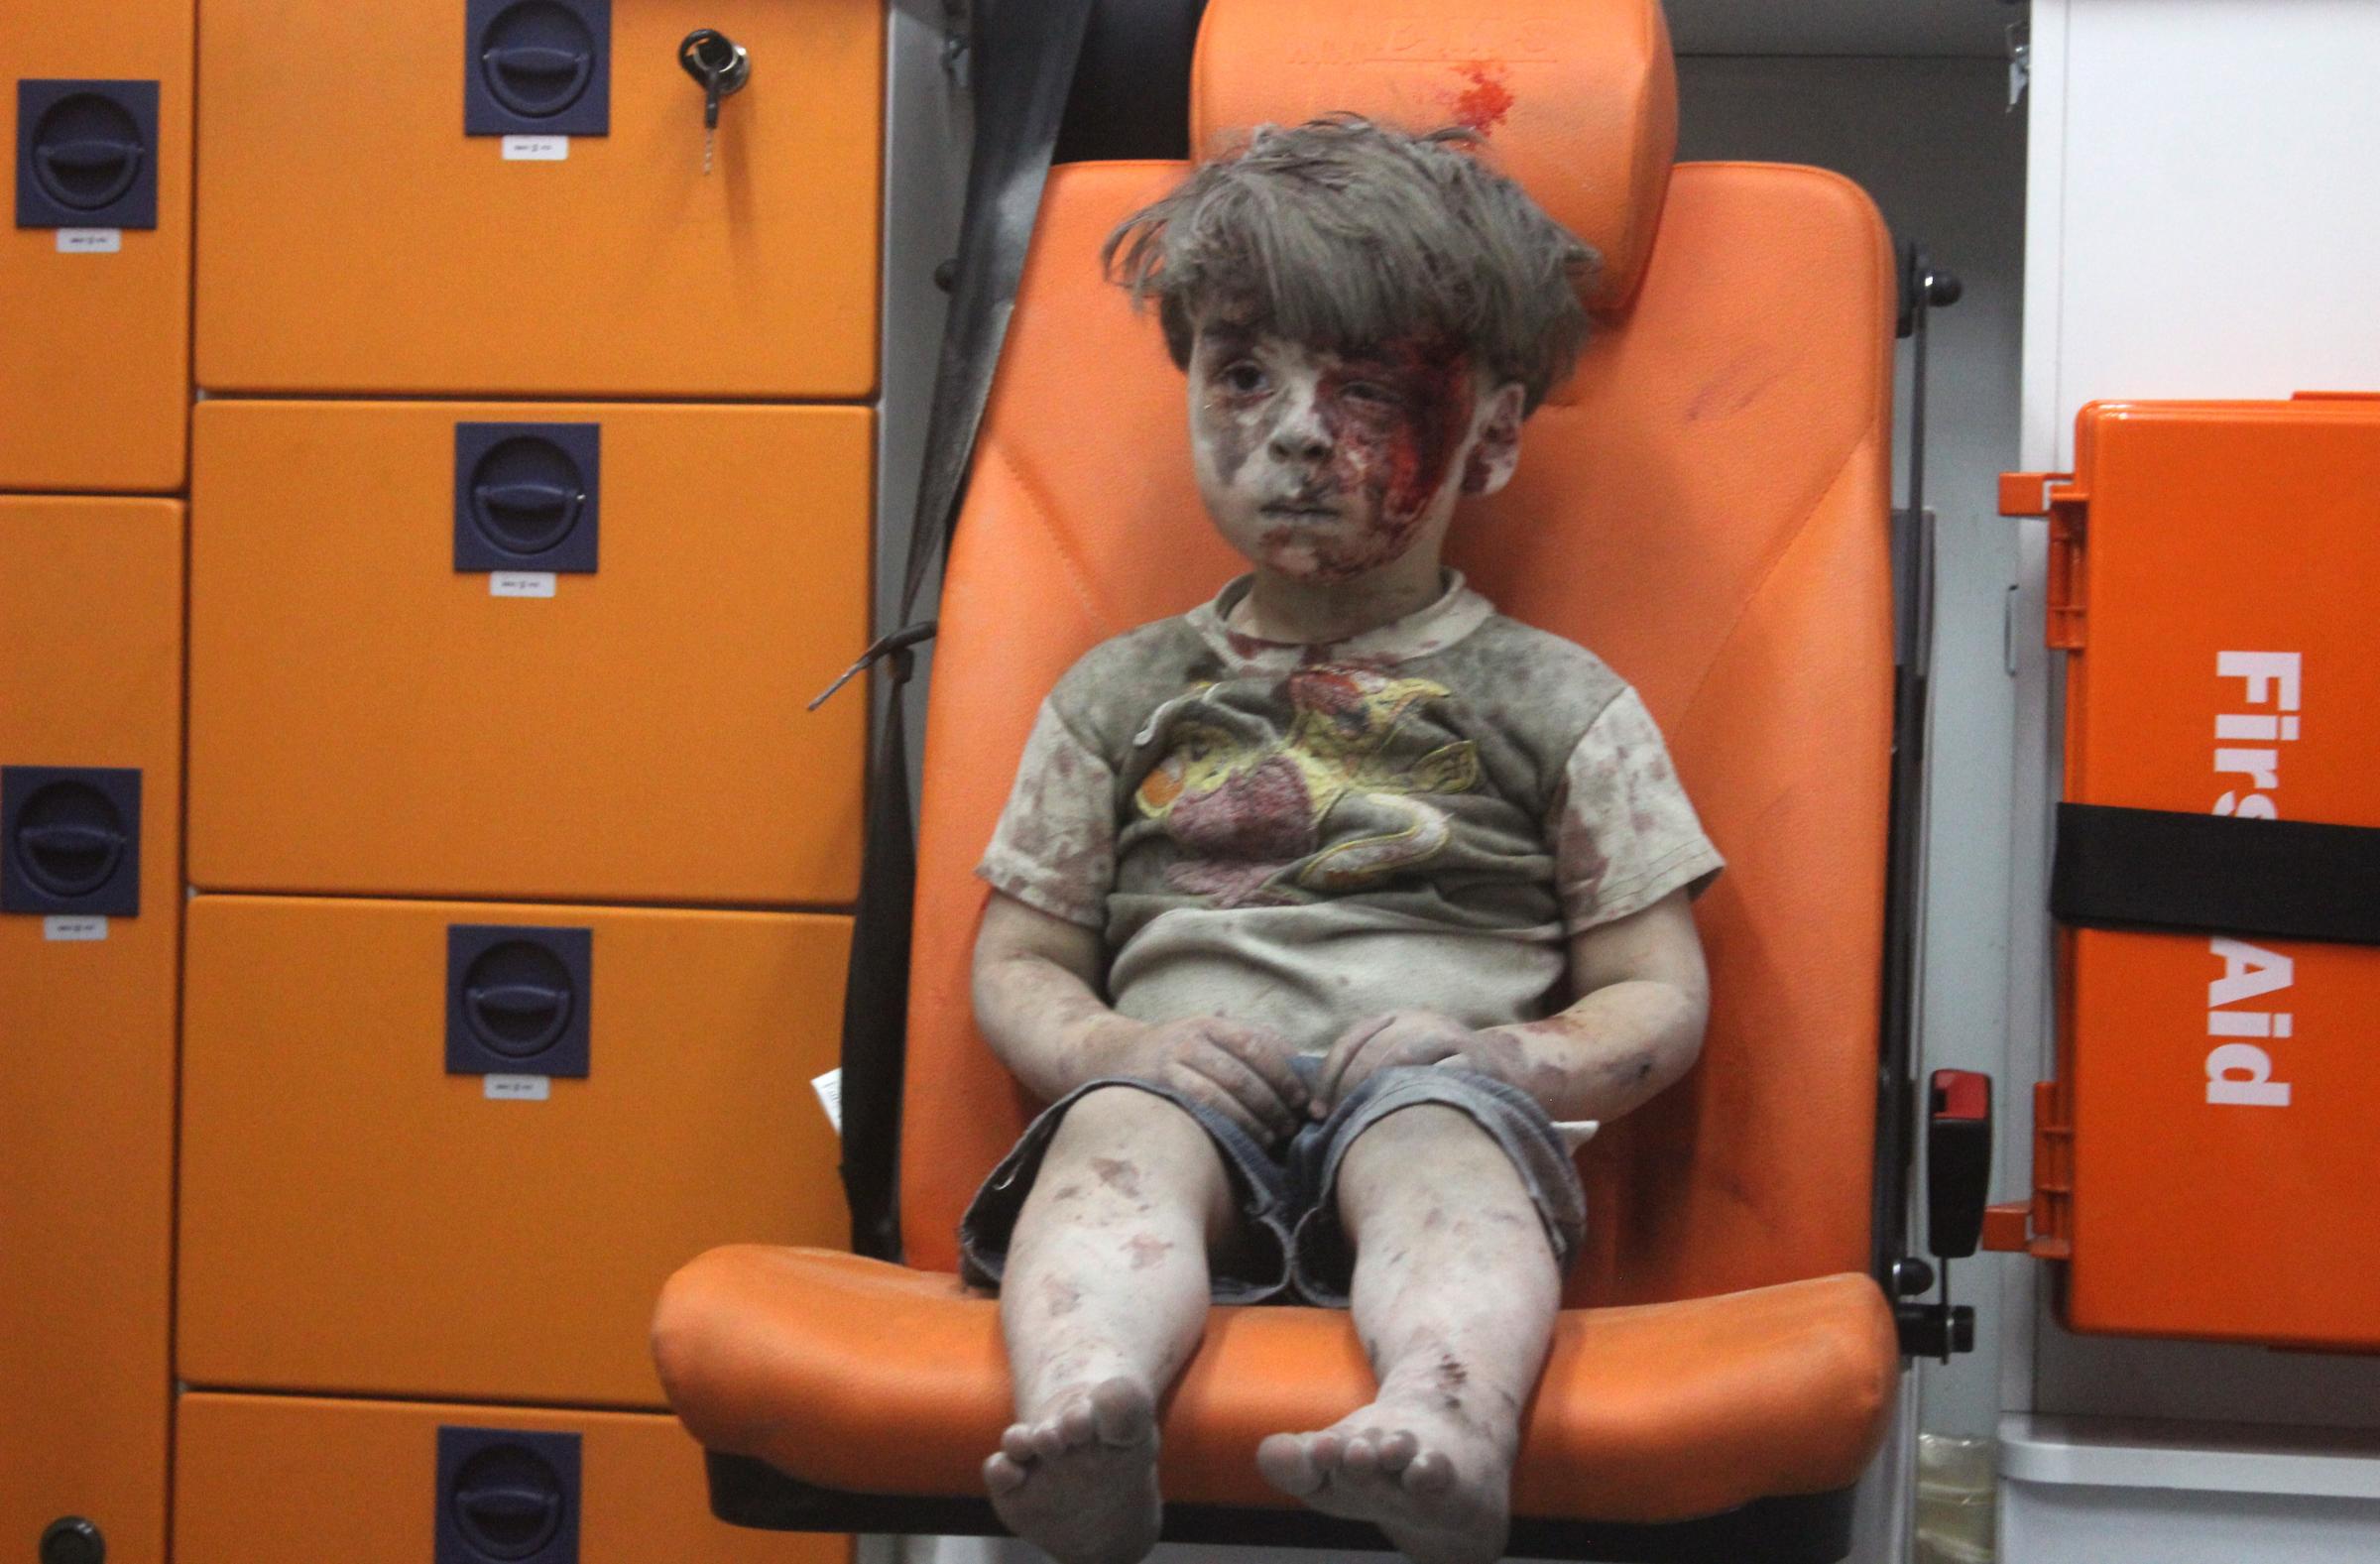 Five-year-old Syrian boy Omran Daqneesh sits alone in the back of the ambulance after he sustained injuries during an airstrike targeting the Qaterji neighborhood of Aleppo on Aug. 17, 2016.